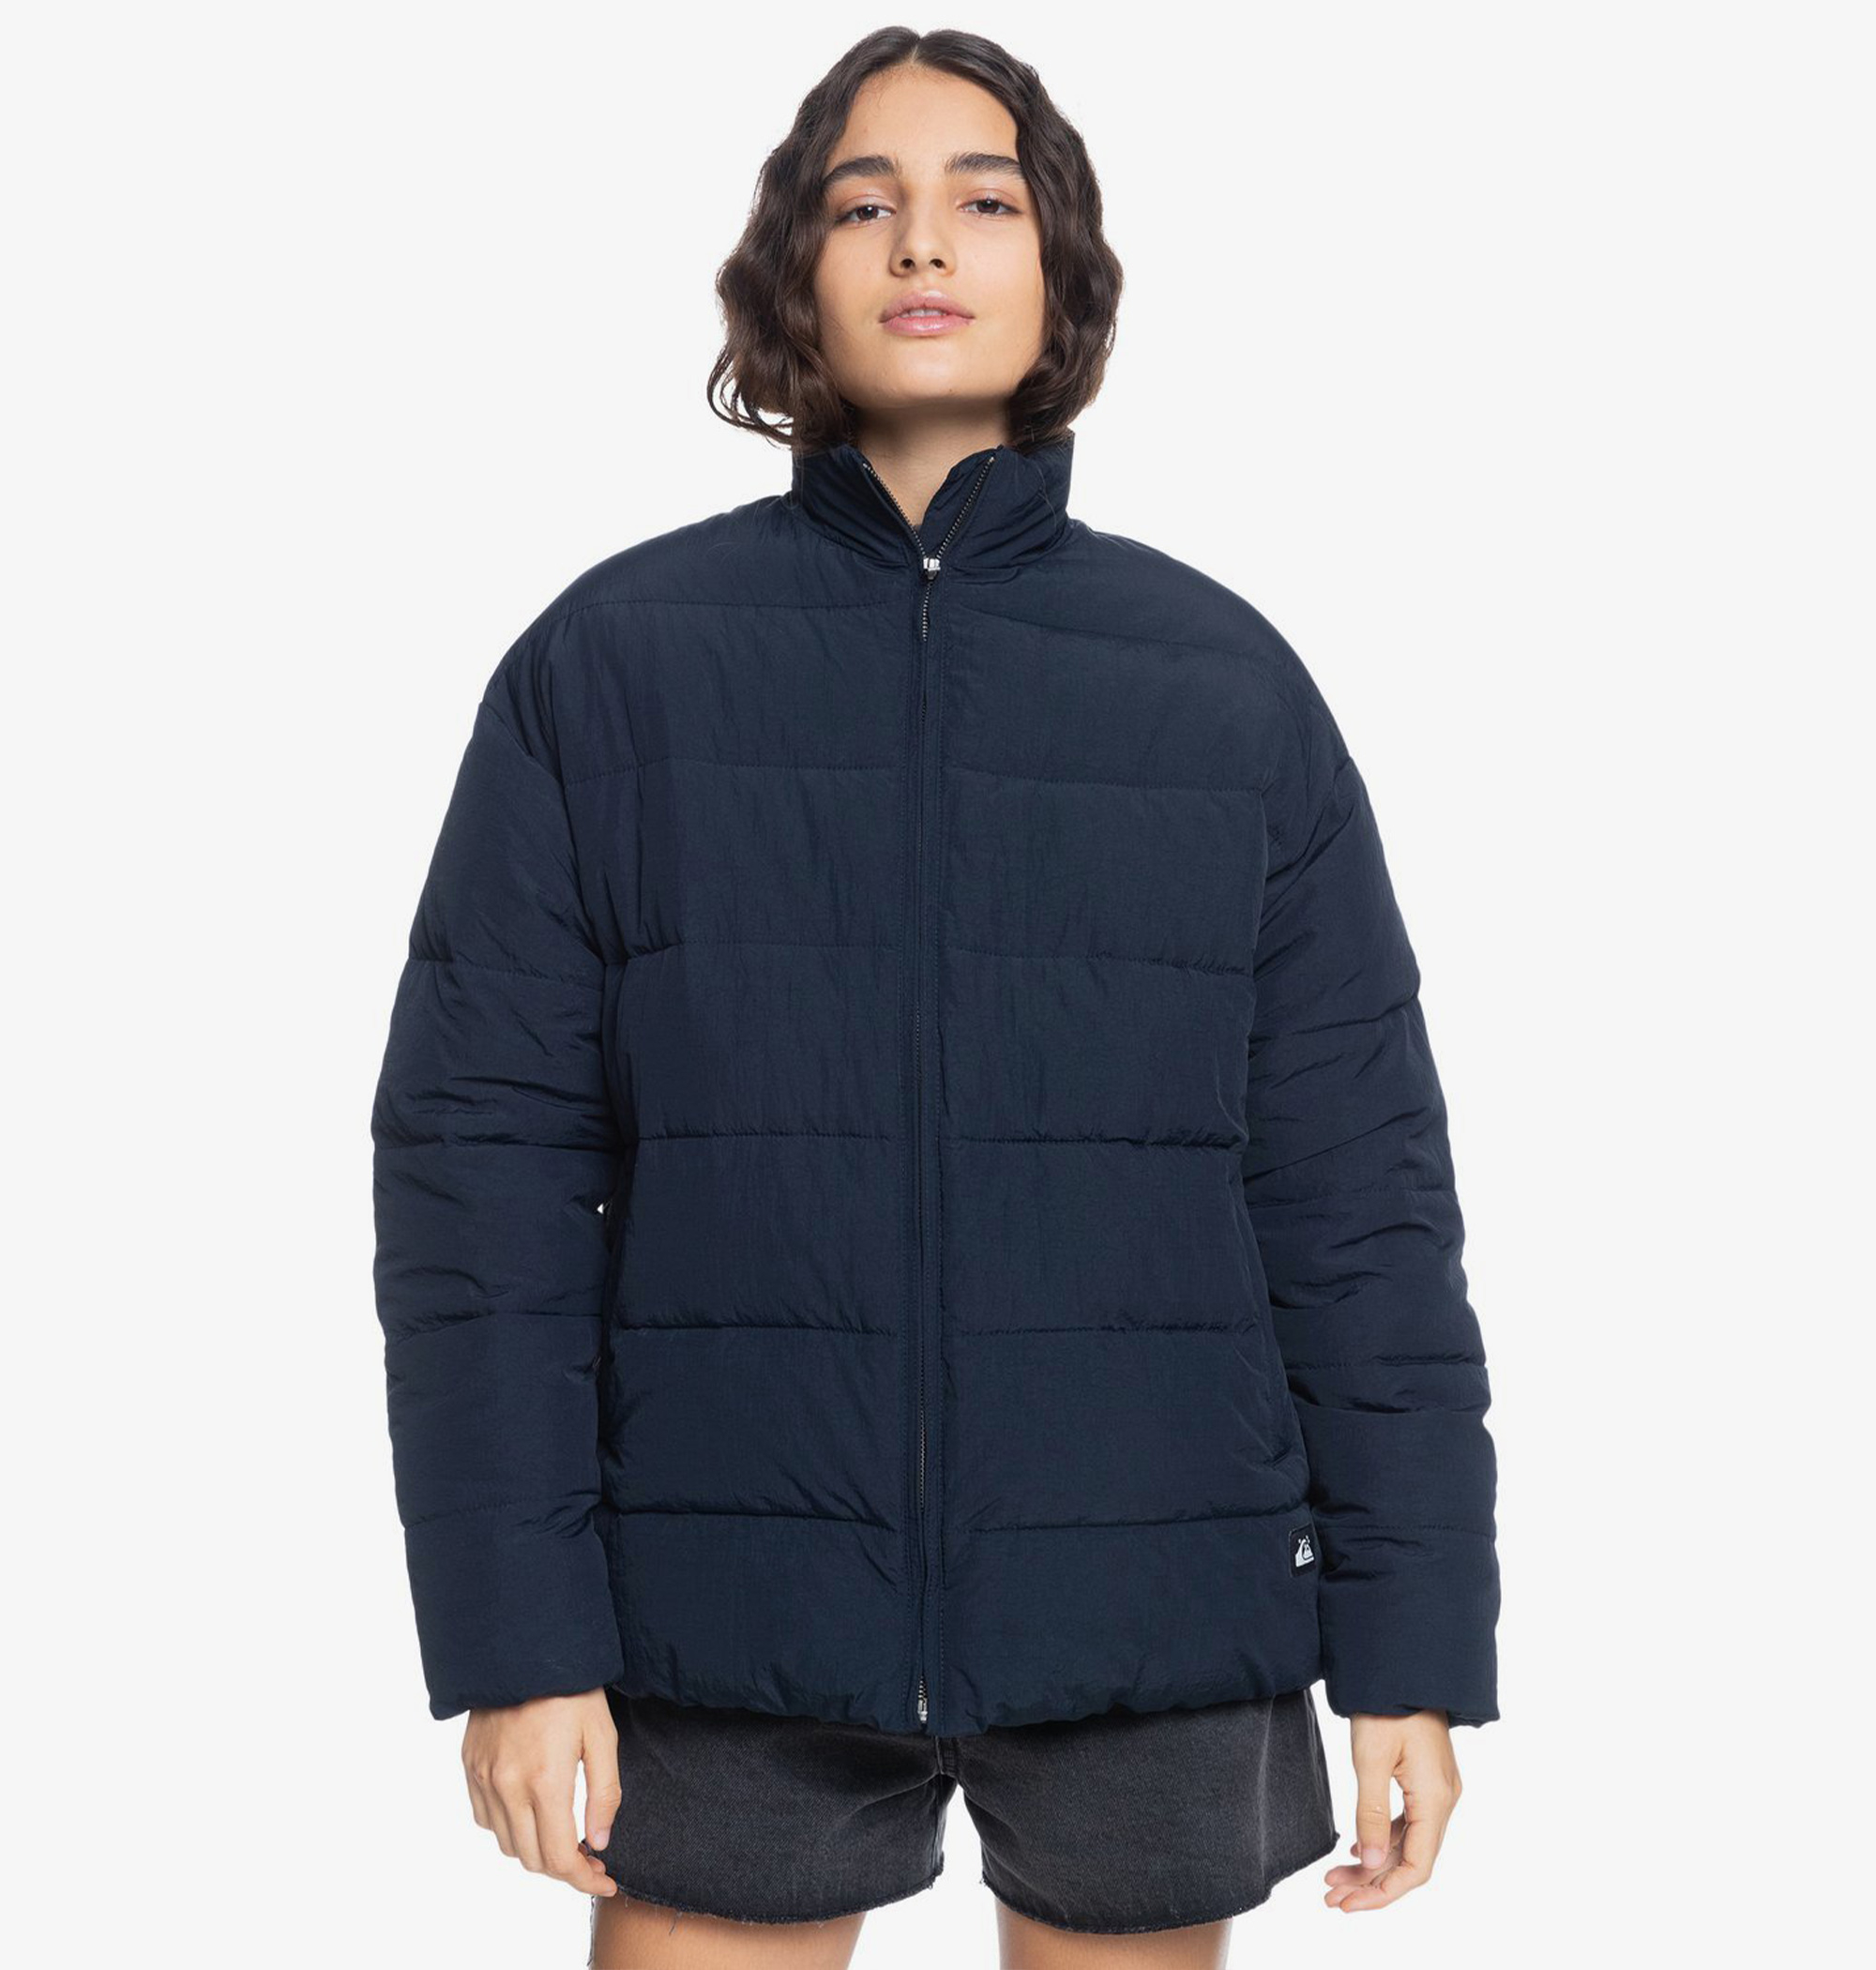 35%OFF！＜Quiksilver＞ STM QUILTED JACKET【送料無料】 柔らかな素材で着心地抜群なダウンジャケットが登場